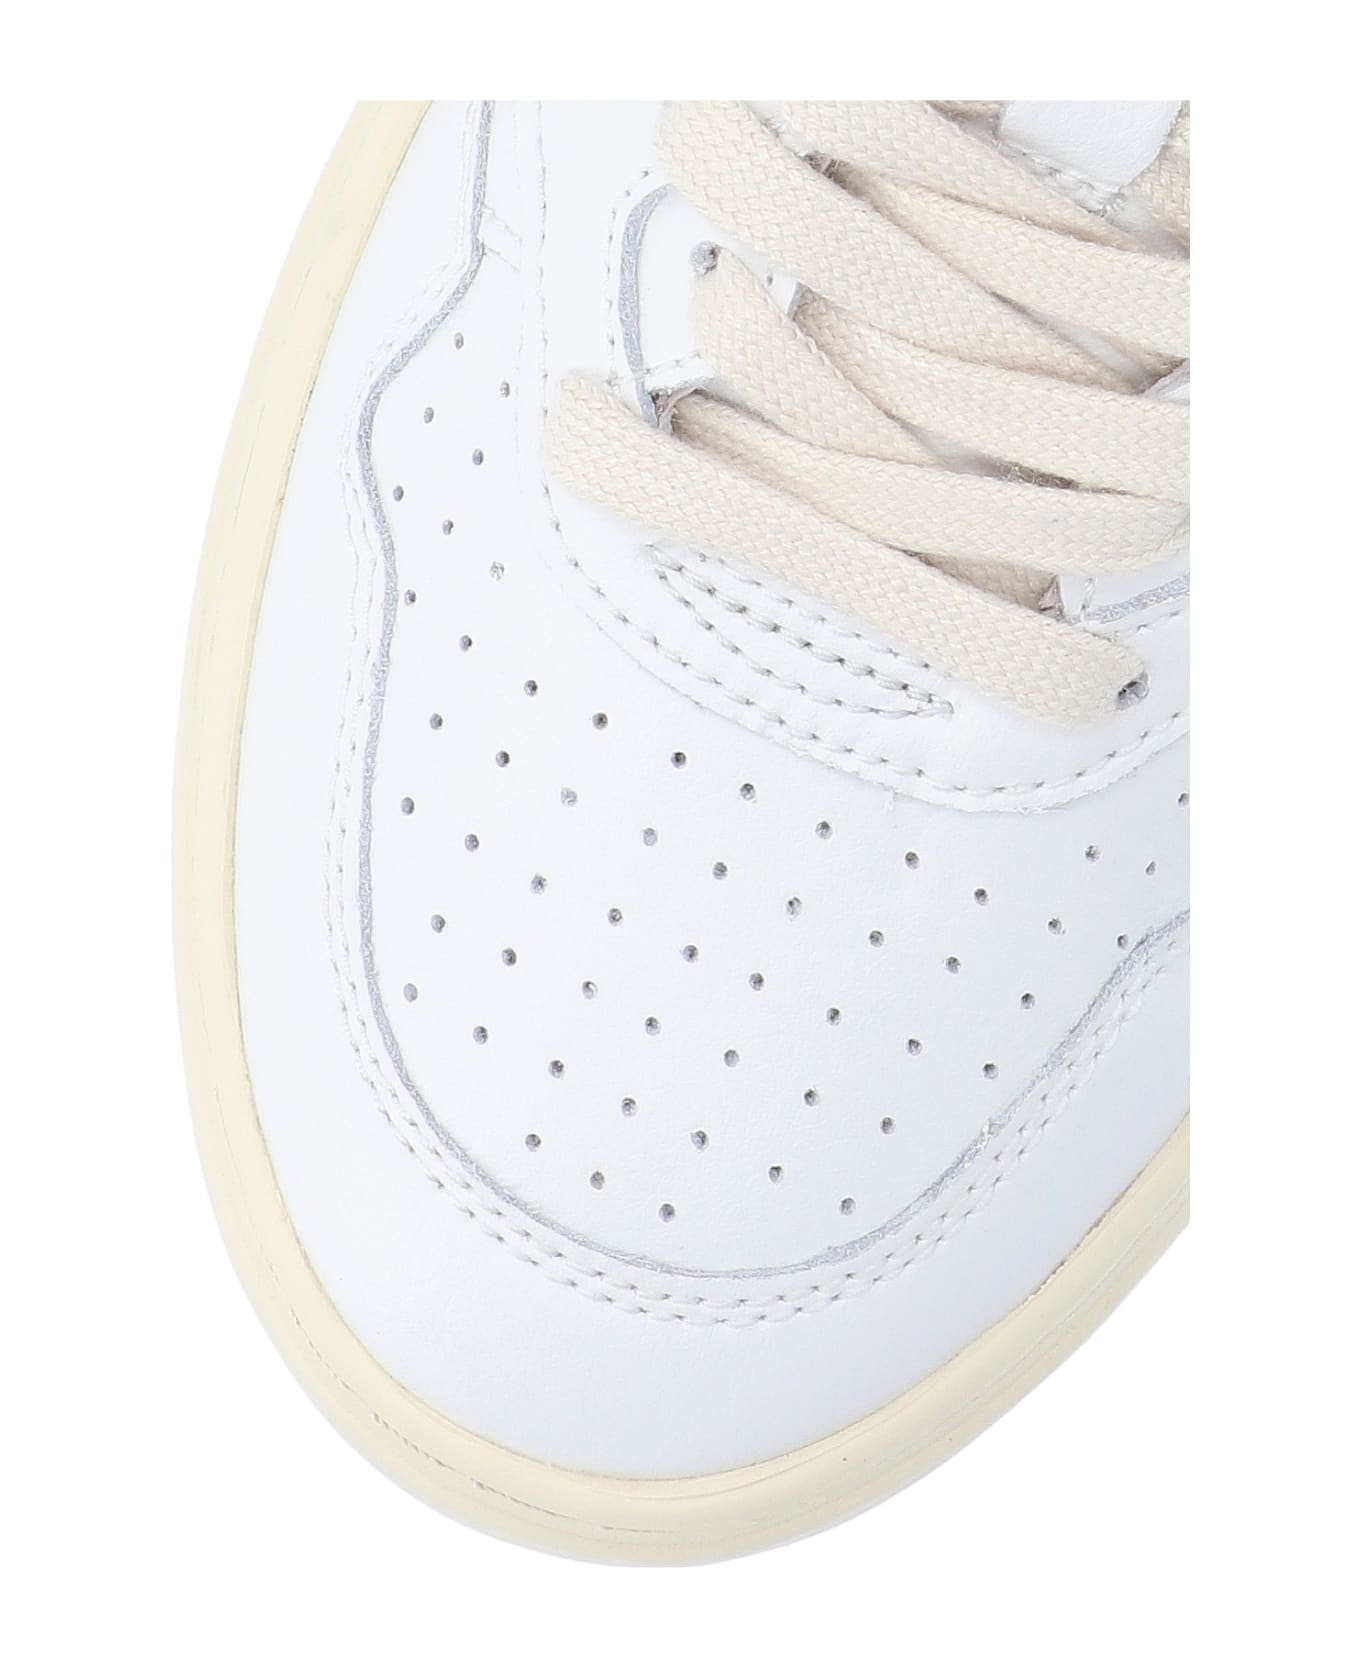 Autry Medalist Low Sneakers - White/pink スニーカー